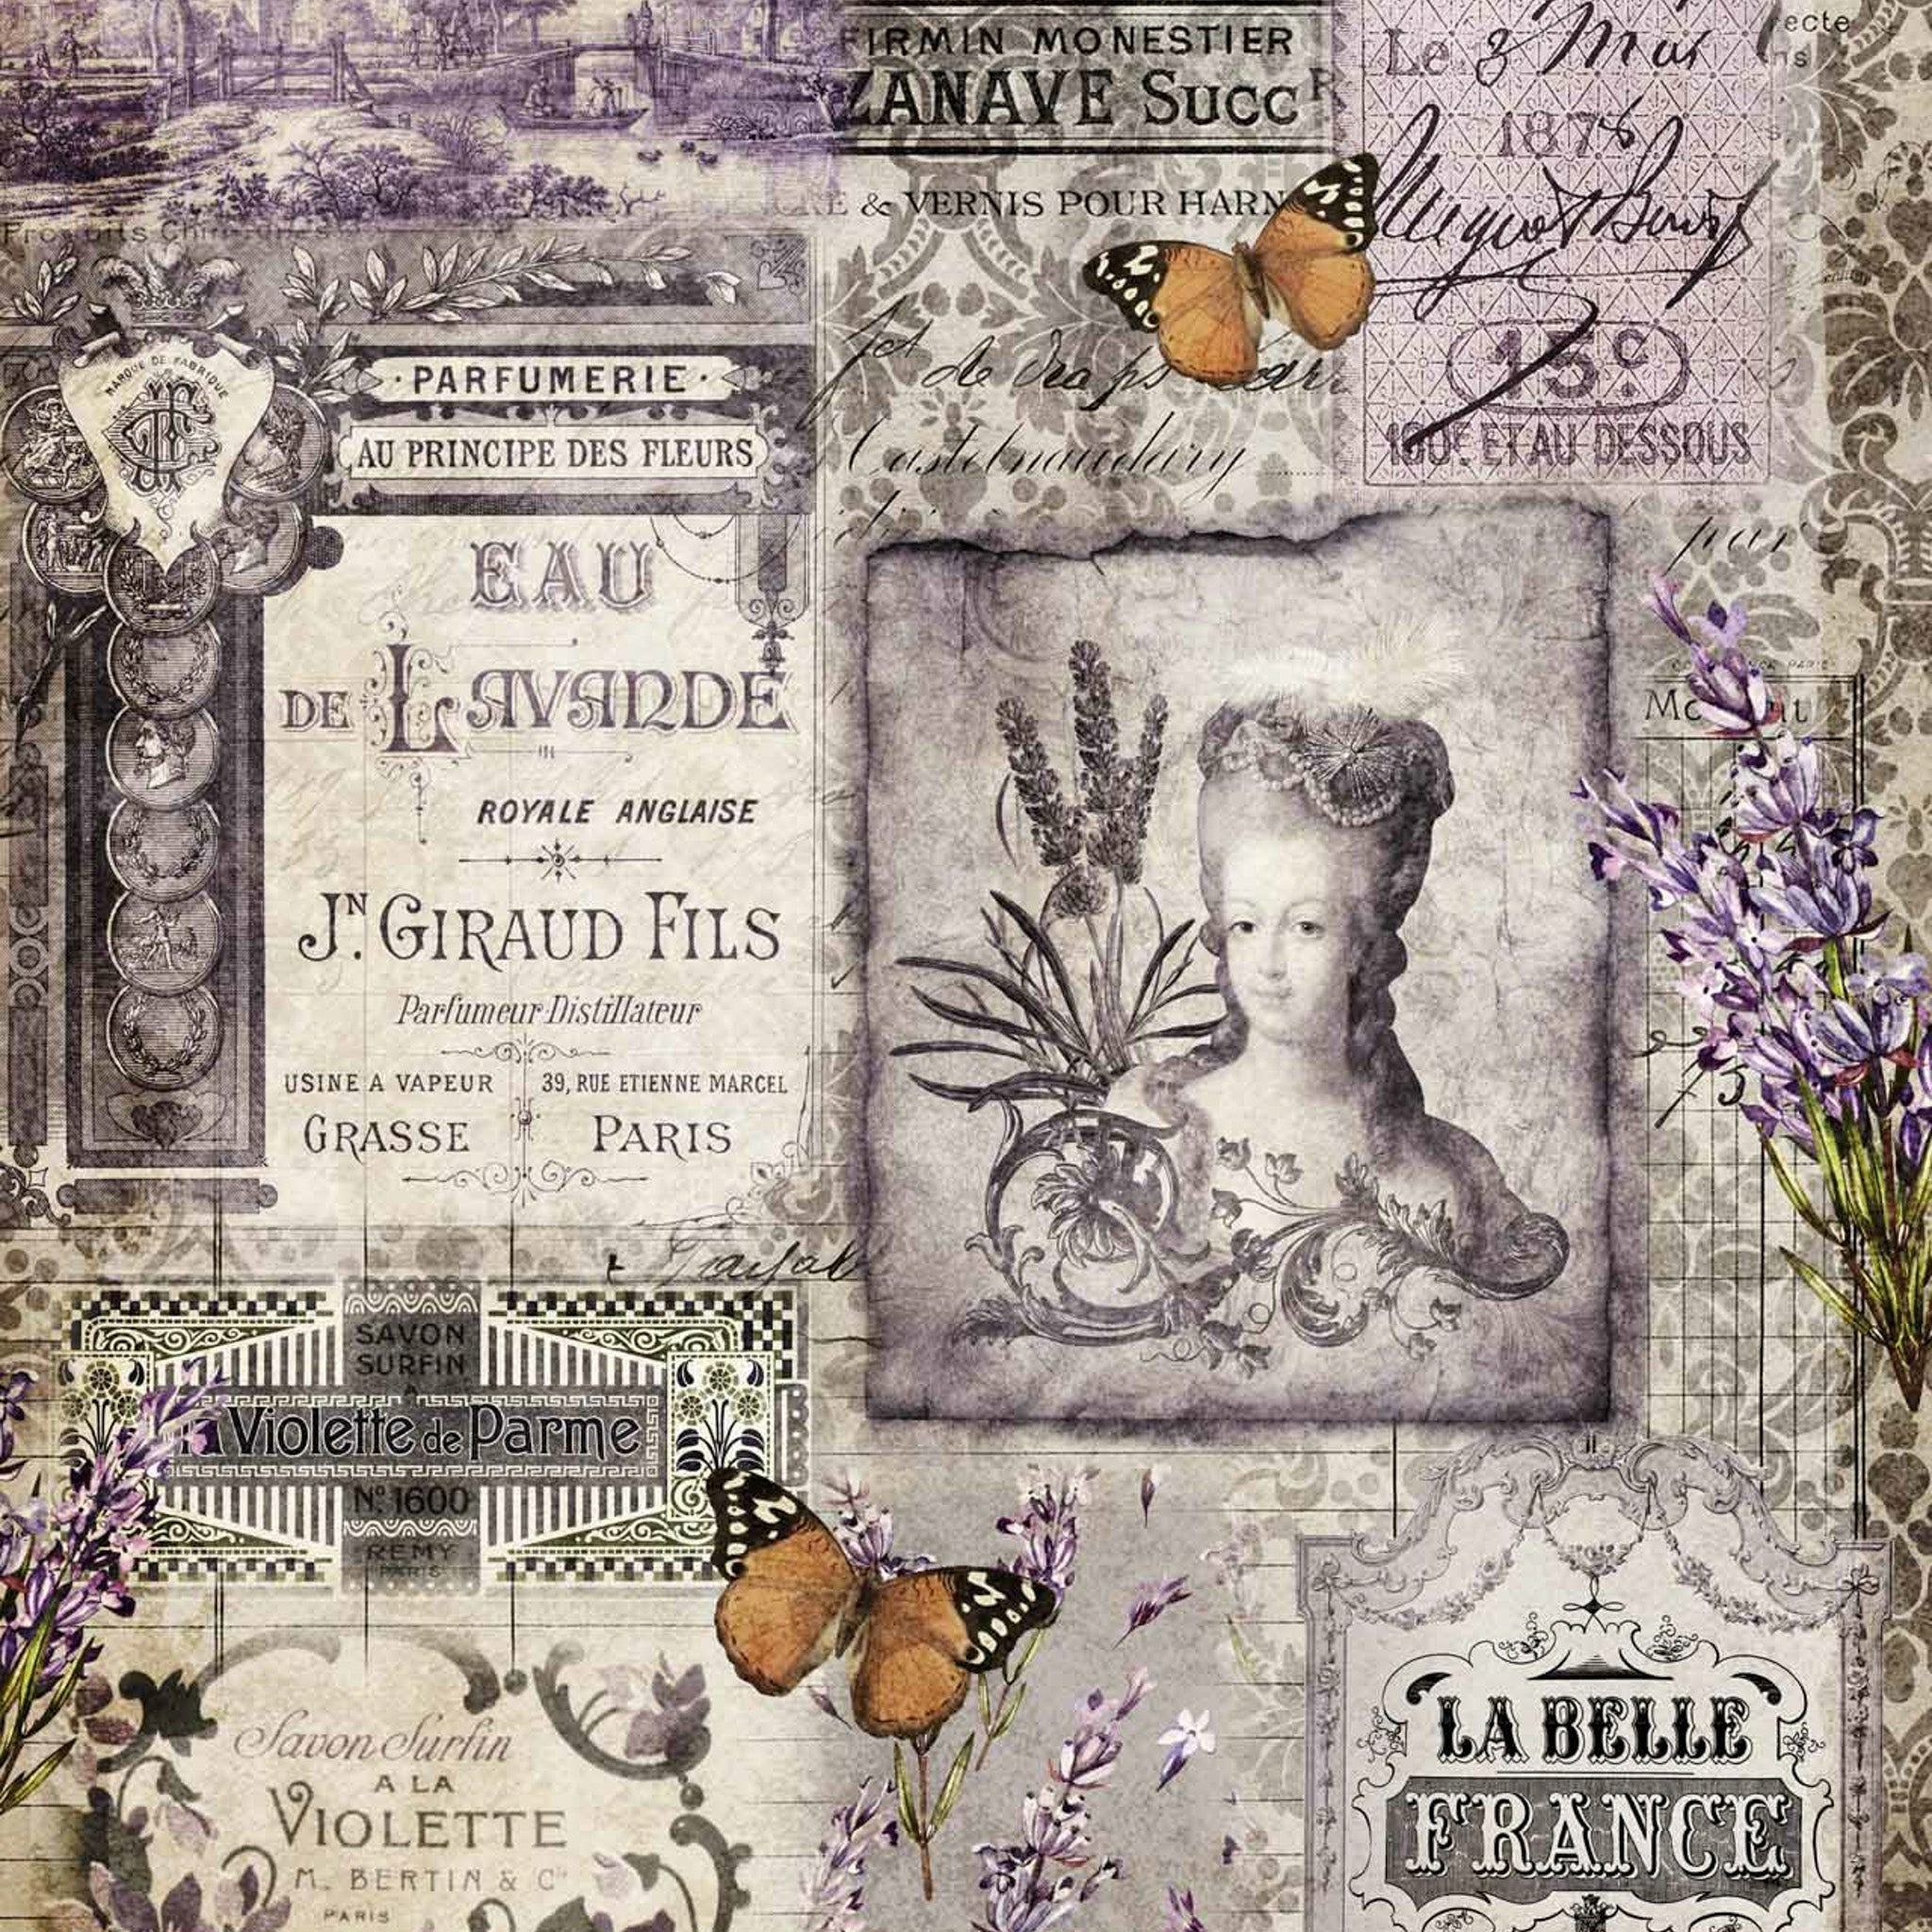 A2 rice paper that features a collage of lavender flowers, butterflies, and vintage French labels.